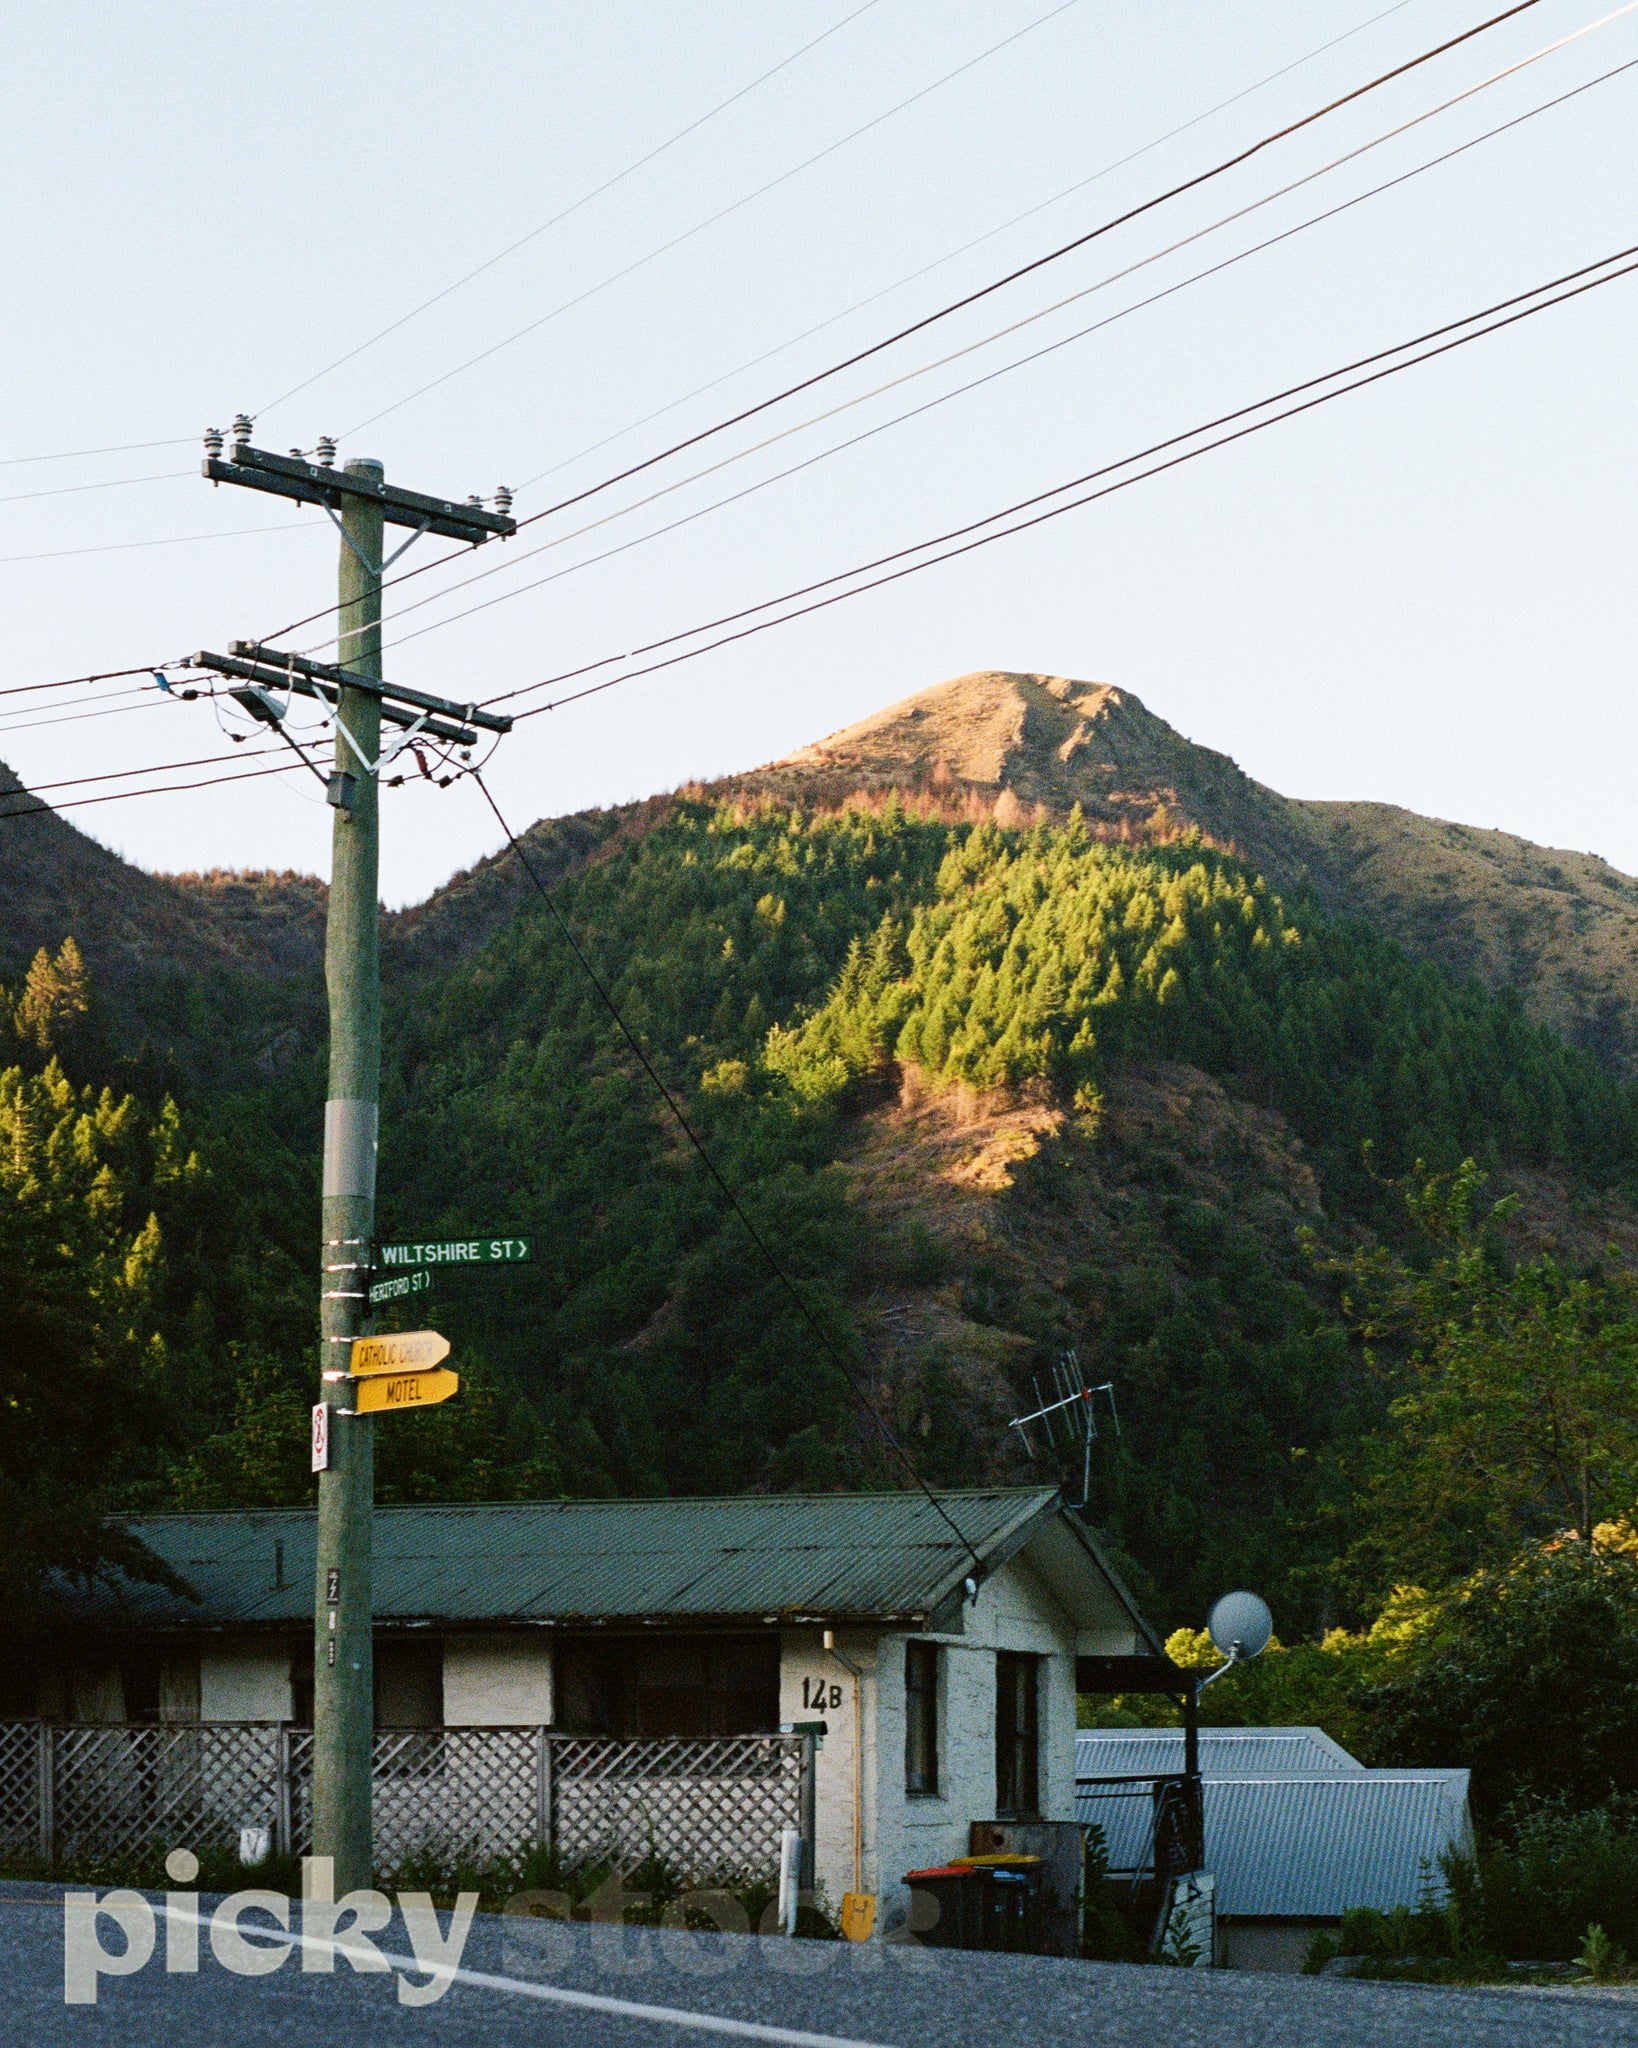 Portrait scene of a New Zealand Street, with a large power pylon and a bunch of yellow and green street signs pointing in various directions. Power lines running across the image. A small single unit yellow house with a green room, with the number 14B noted. Behind the house is a mountain range with dense pine trees scattered and grouped throughout. Golden light touching the mountain peak.